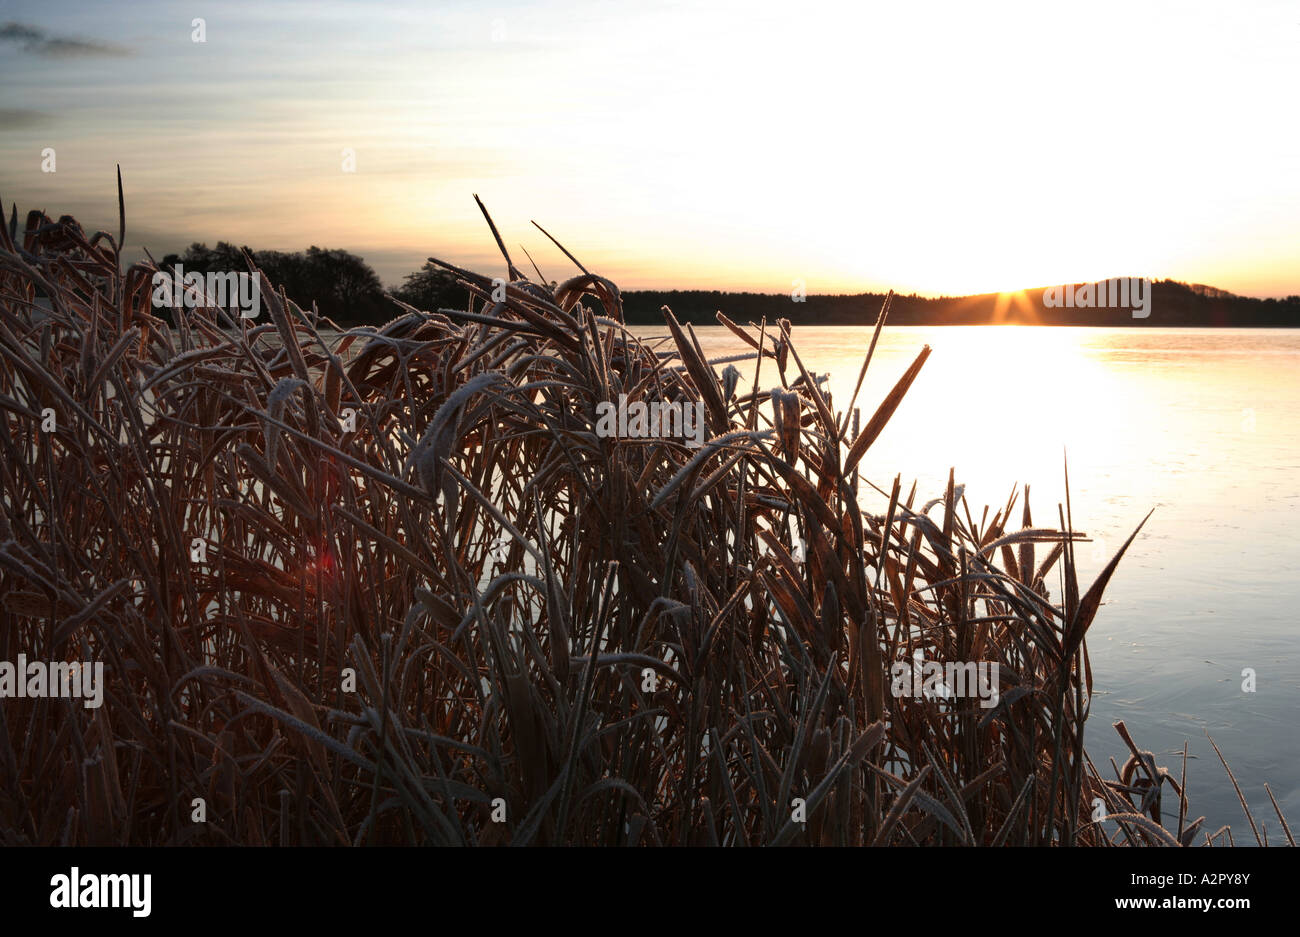 Landscape image of an early morning winter sunrise over Loch of Skene, Aberdeenshire with golden rays and foreground reeds. Stock Photo